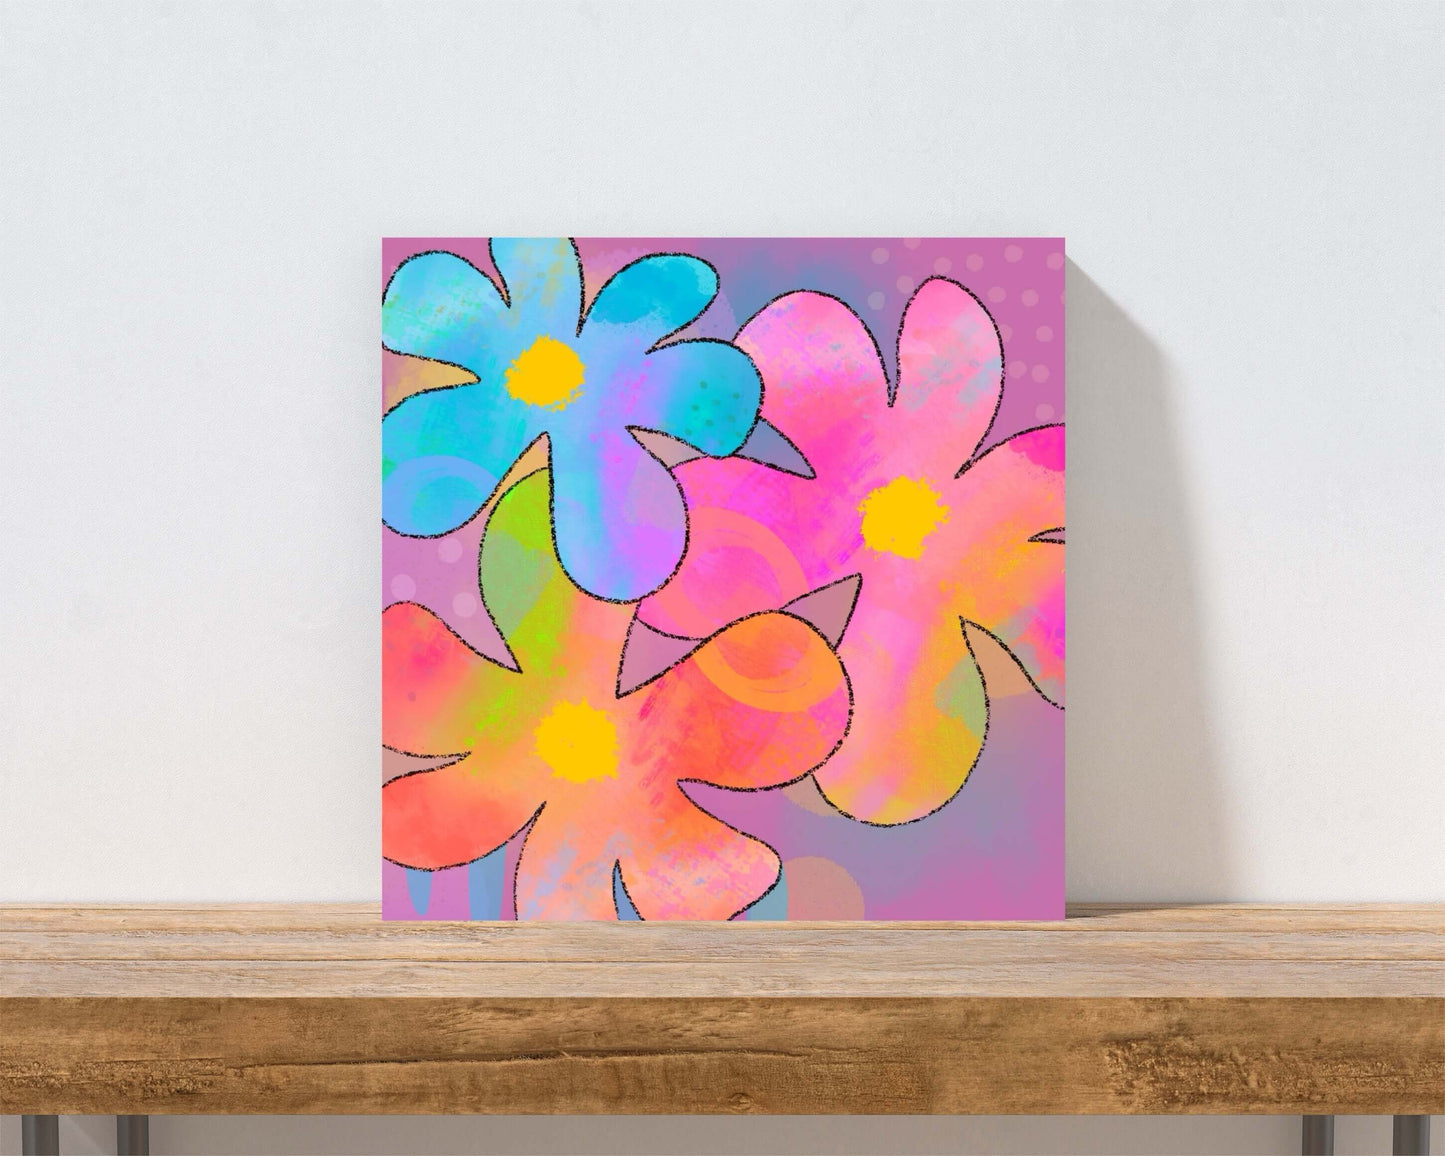 Big Colorful 1960s Psychedelic “Hippie Flowers” Canvas Print Wall Art Small Canvas on Shelf